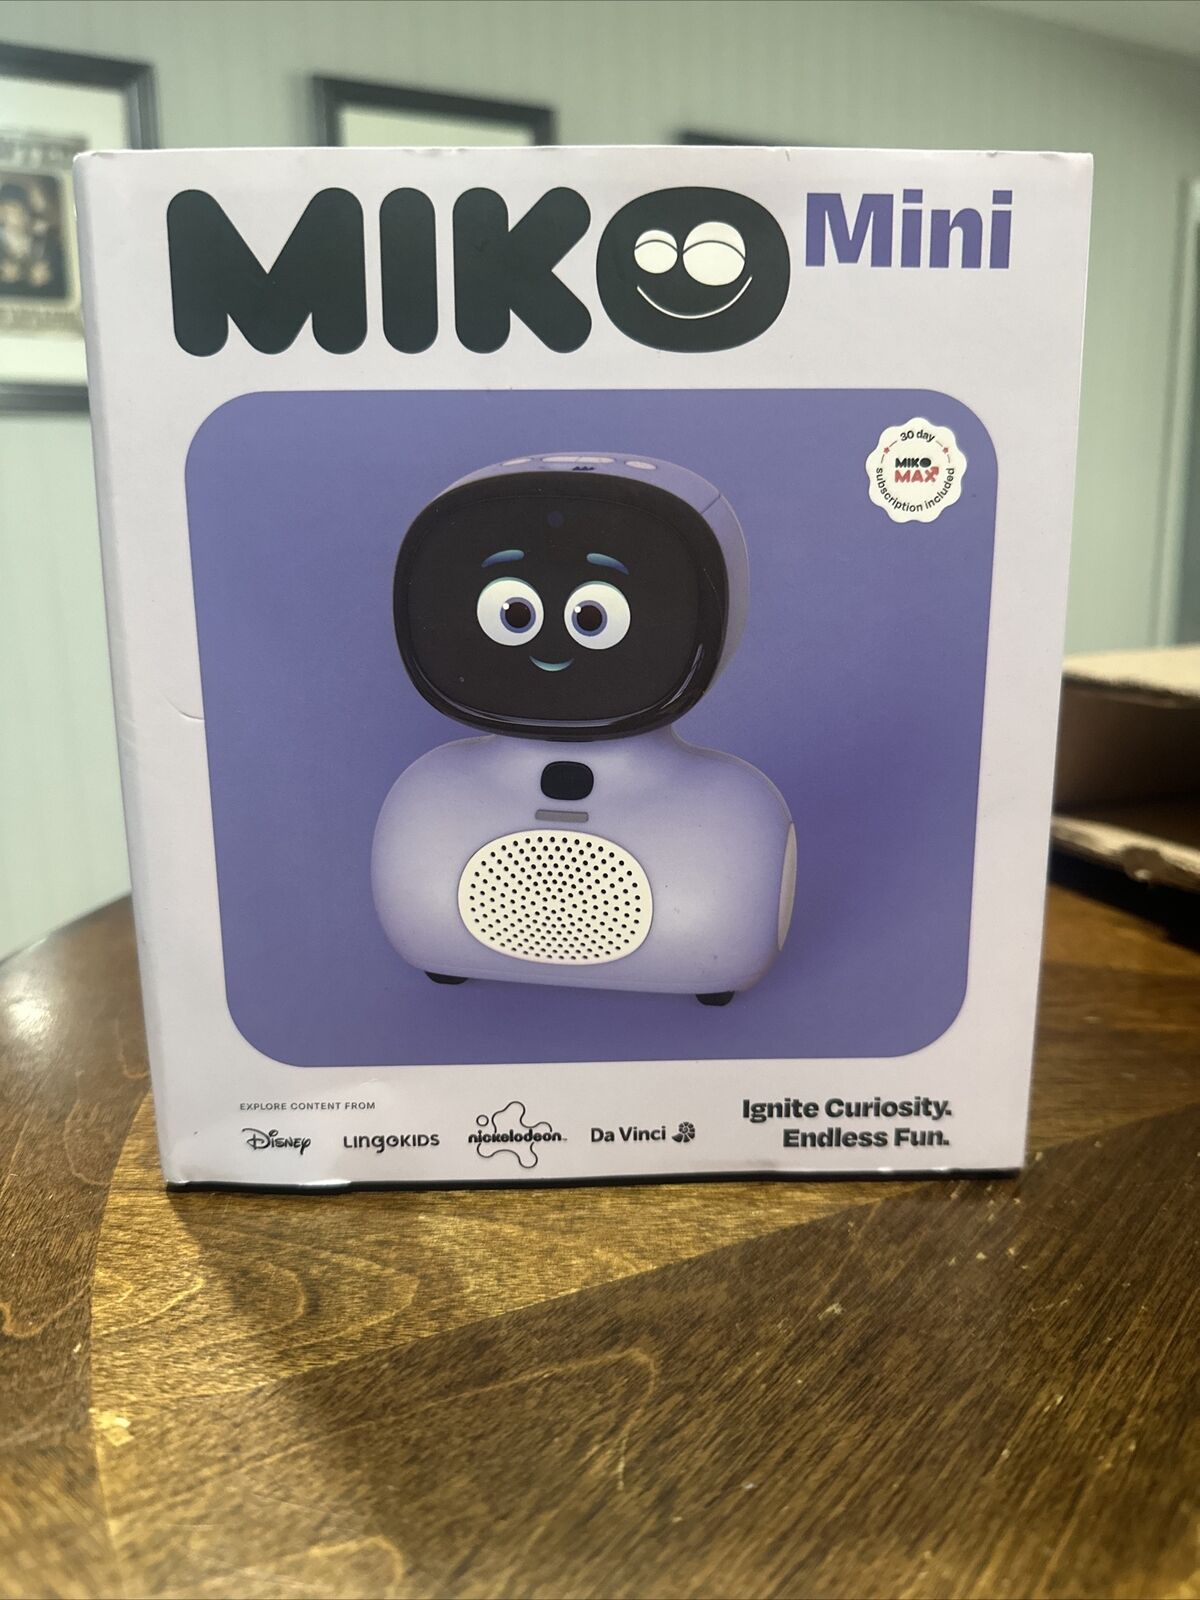 MIKO Mini with 30 Days Max : AI Robot for Kids, Interactive Bot - New, open box